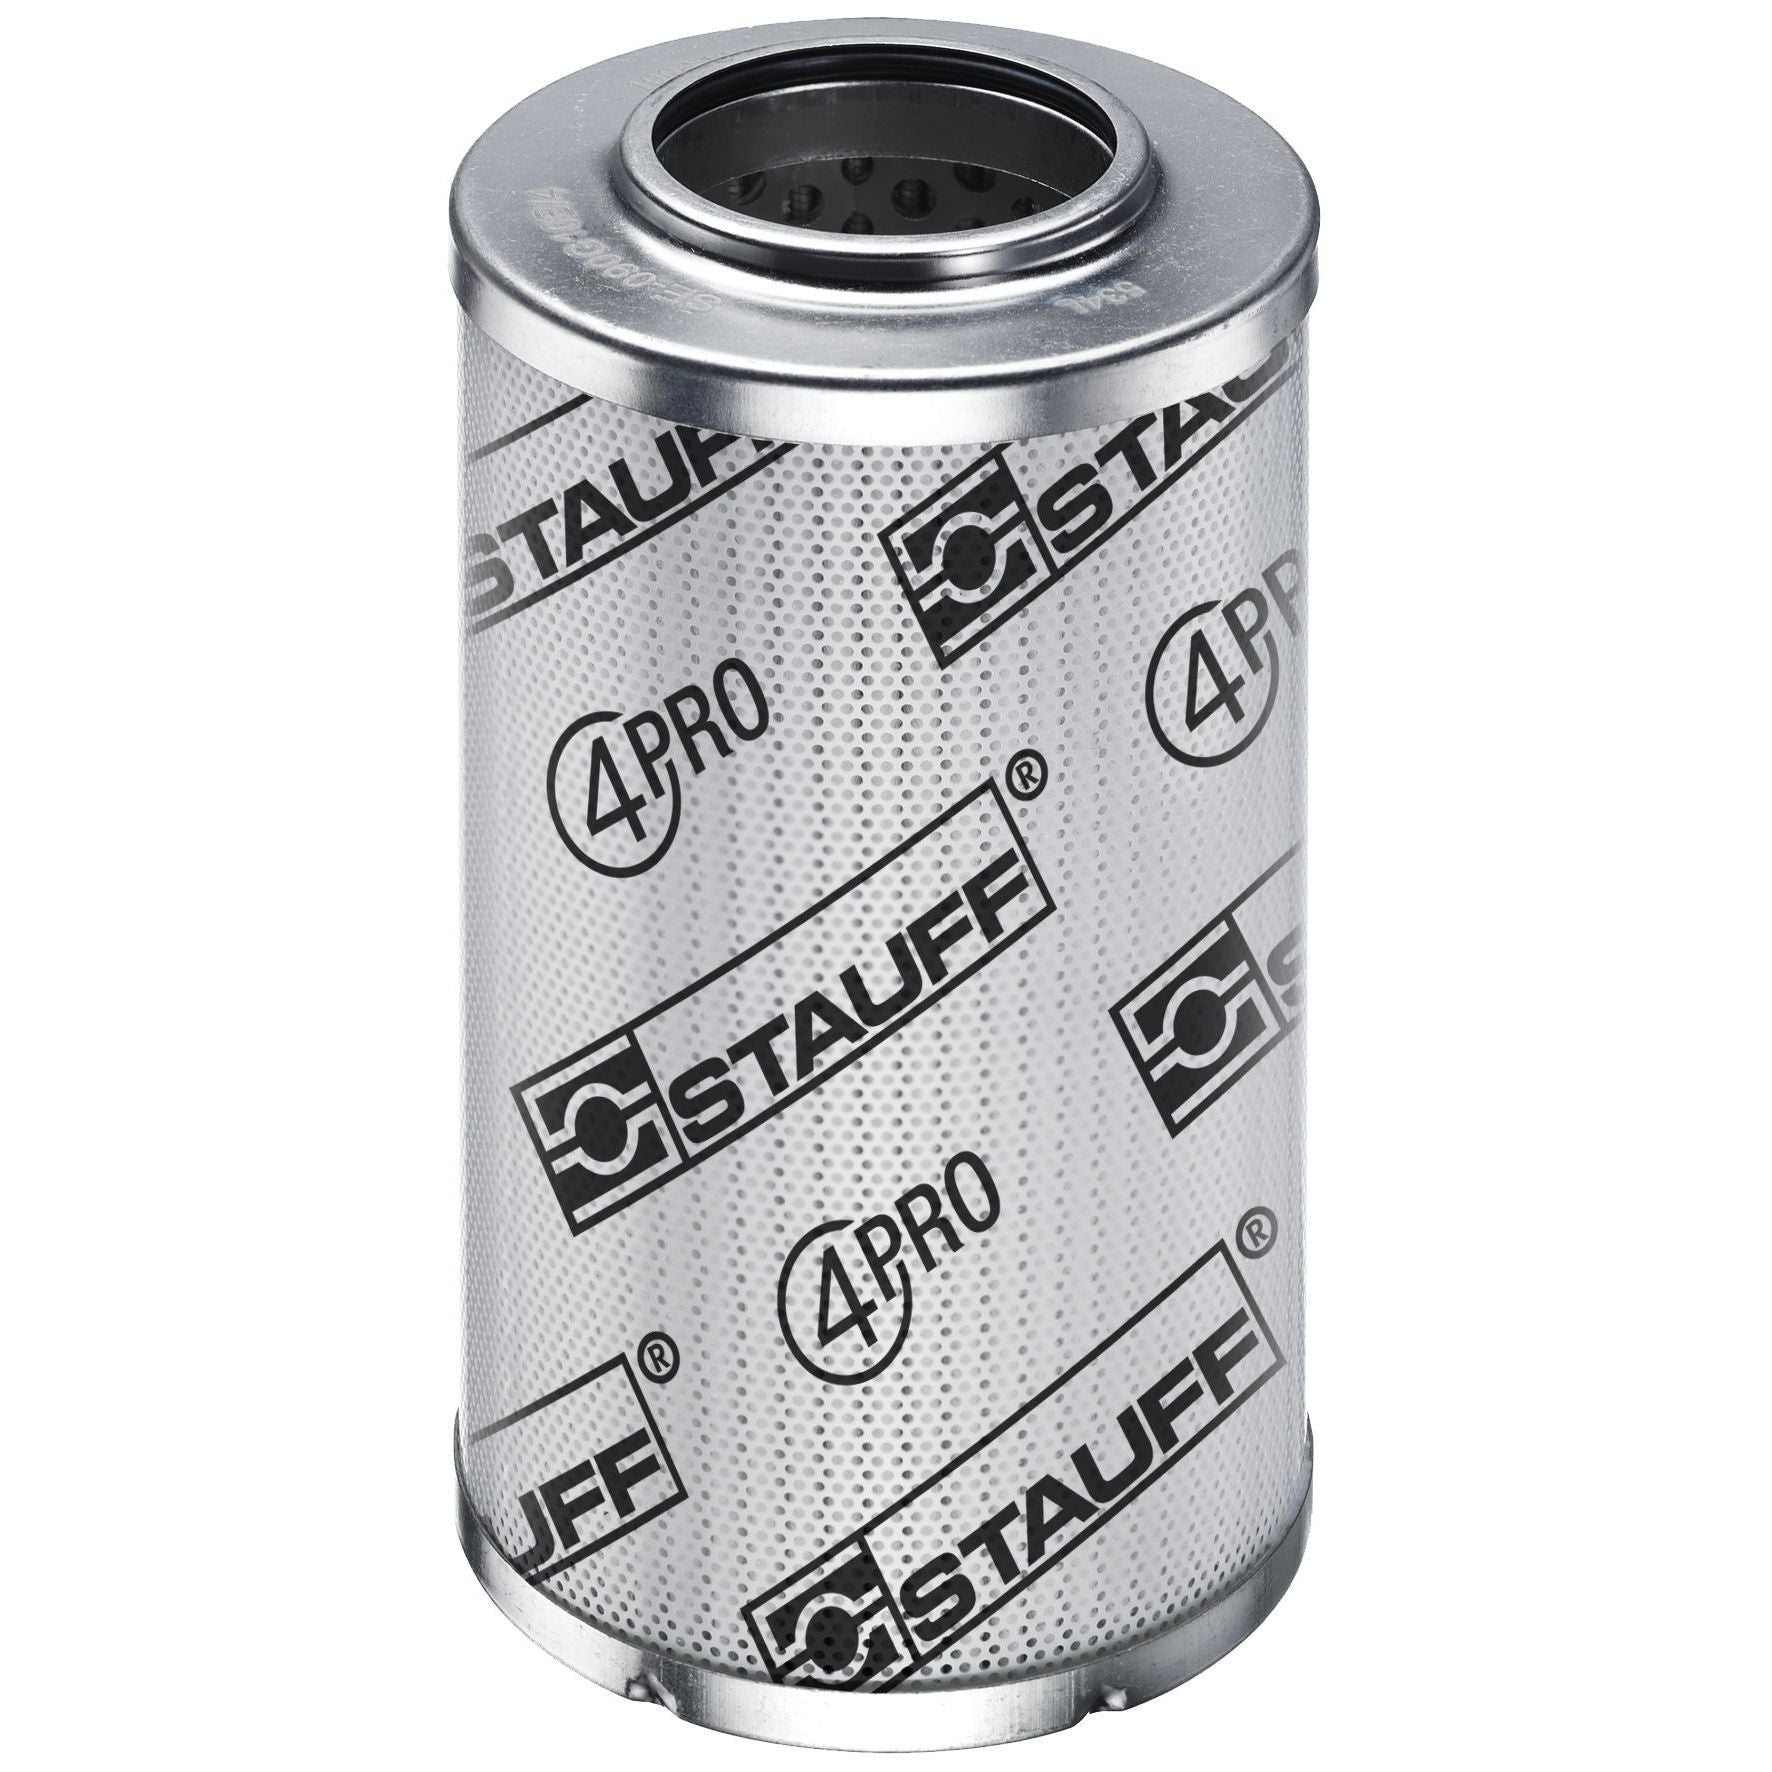 SE-014-H-20-B/4 : Stauff SF-014 Series Filter Element, 20 Micron, Synthetic, 3045psi Collapse Differential, Buna